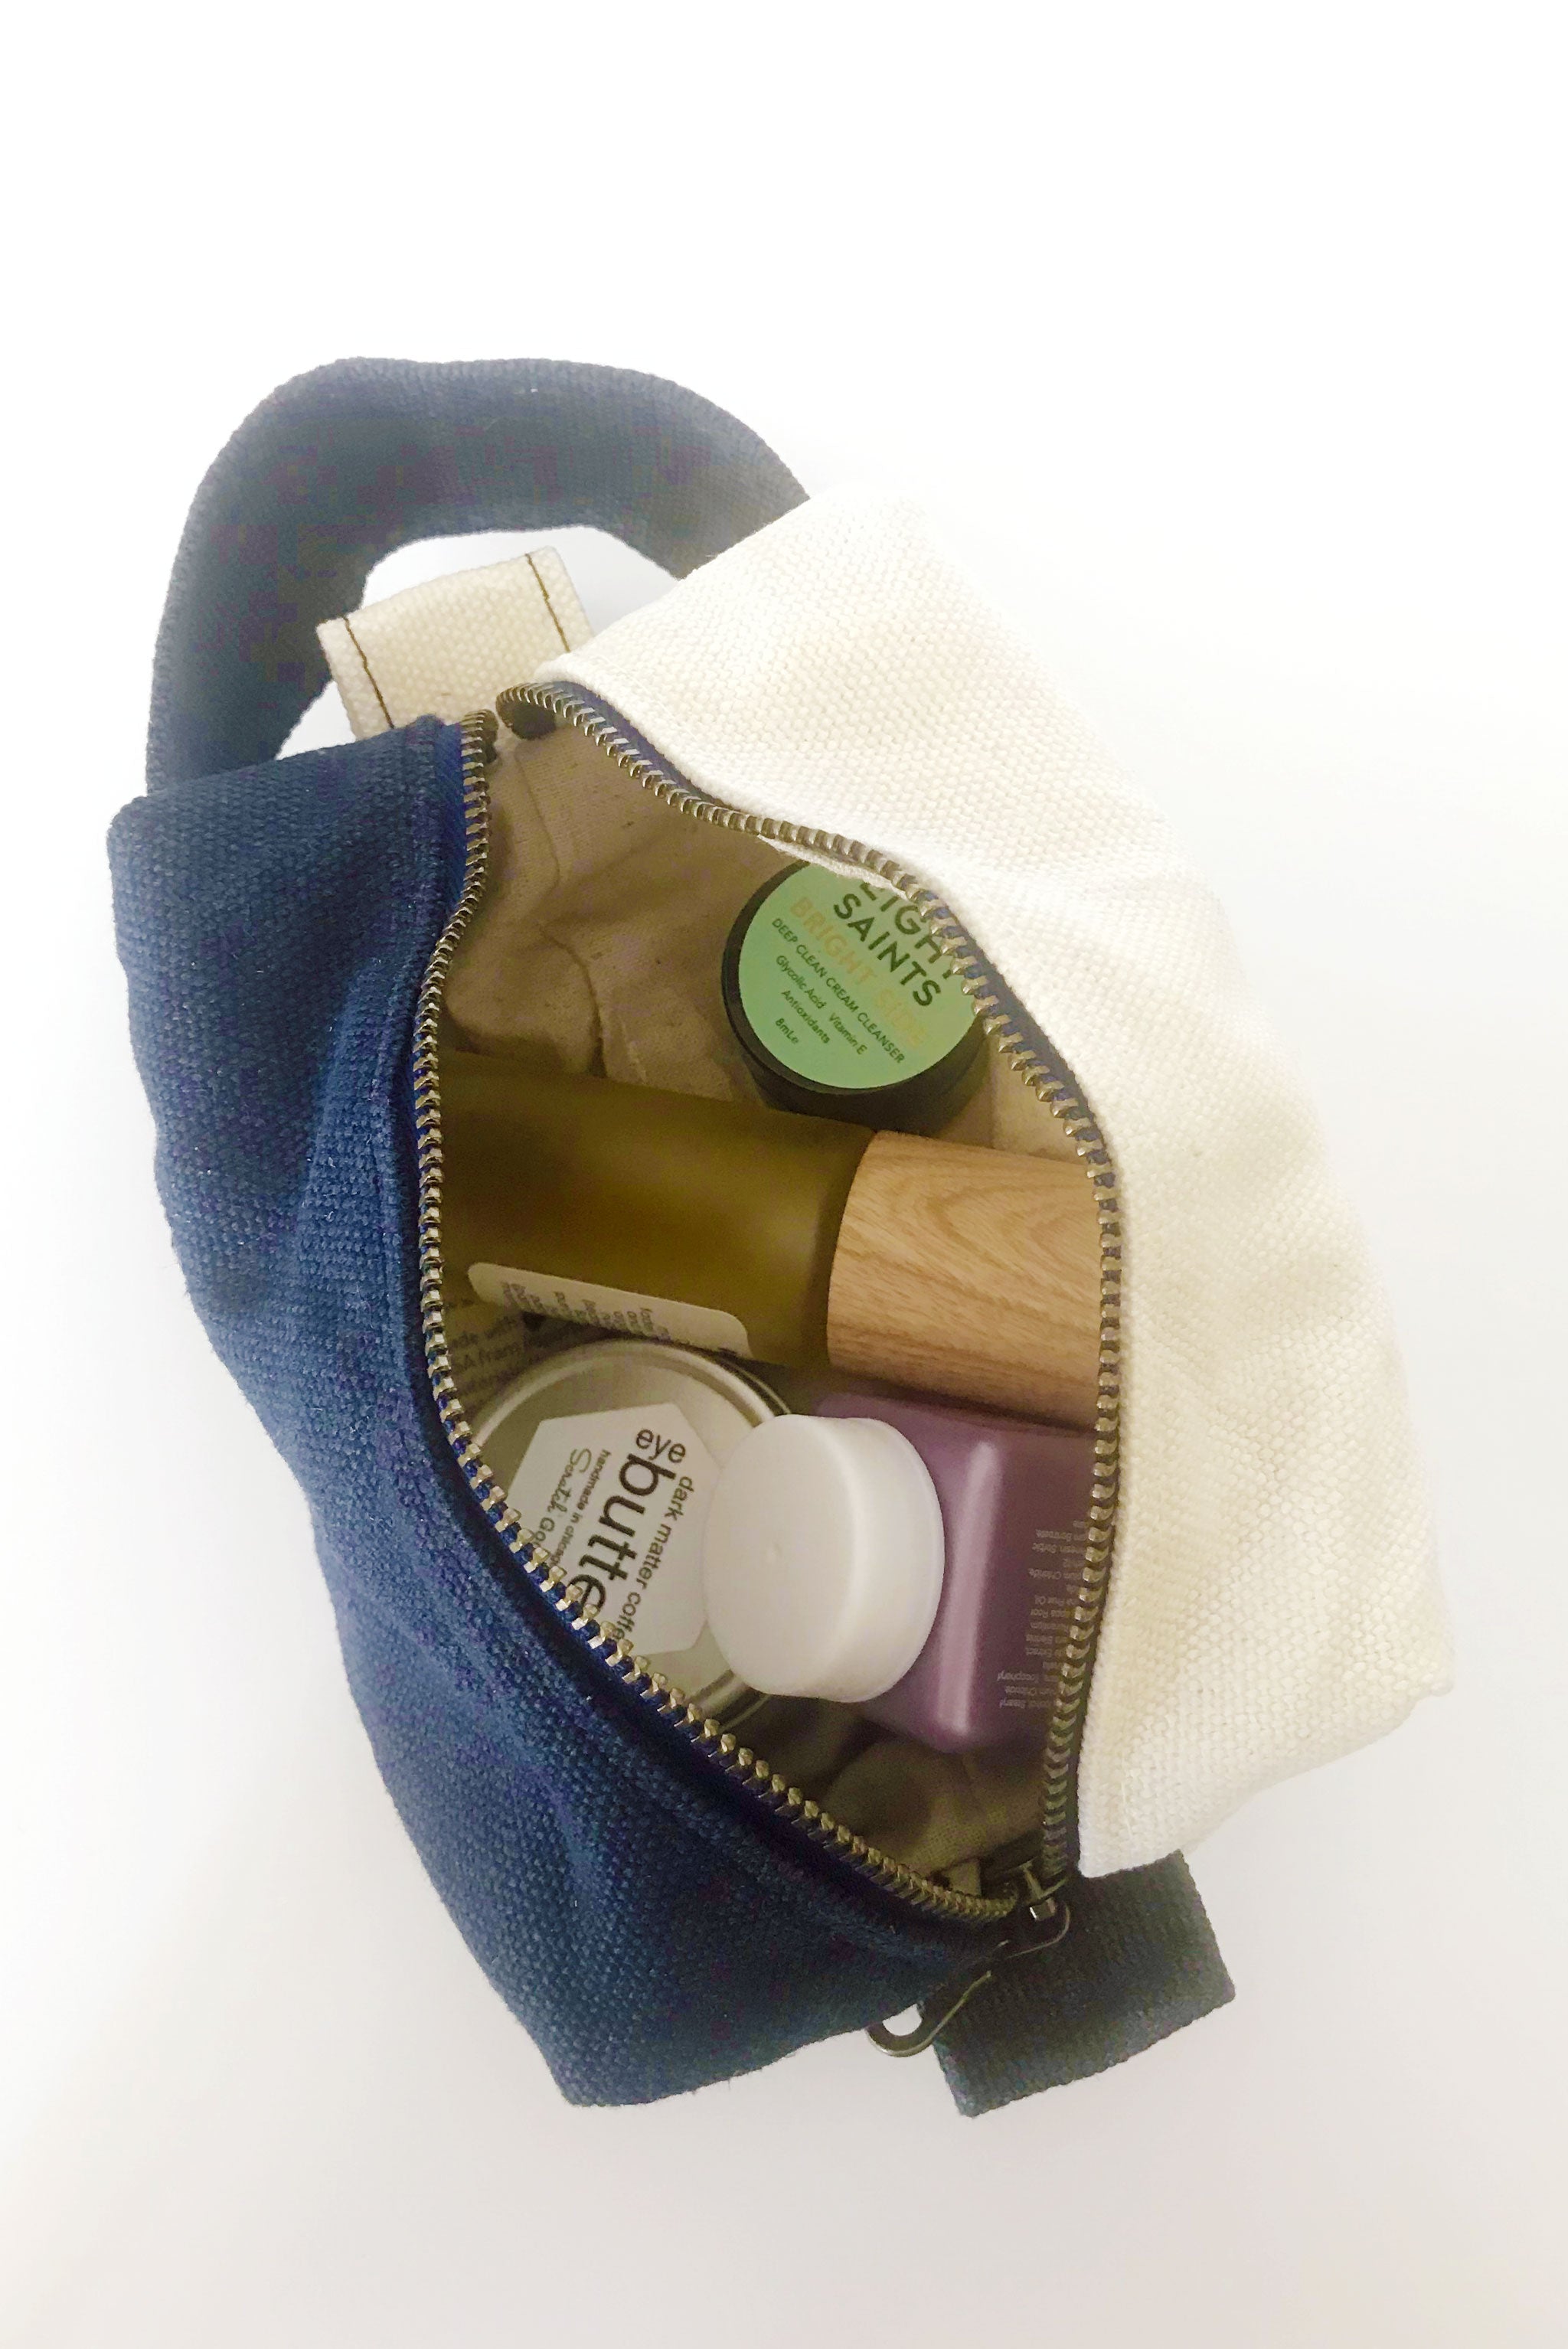 small waxed canvas toiletry bag with handle and brass zipper. The bag is open and contains small toiletries inside. The bag is half cream and half dark navy blue. 